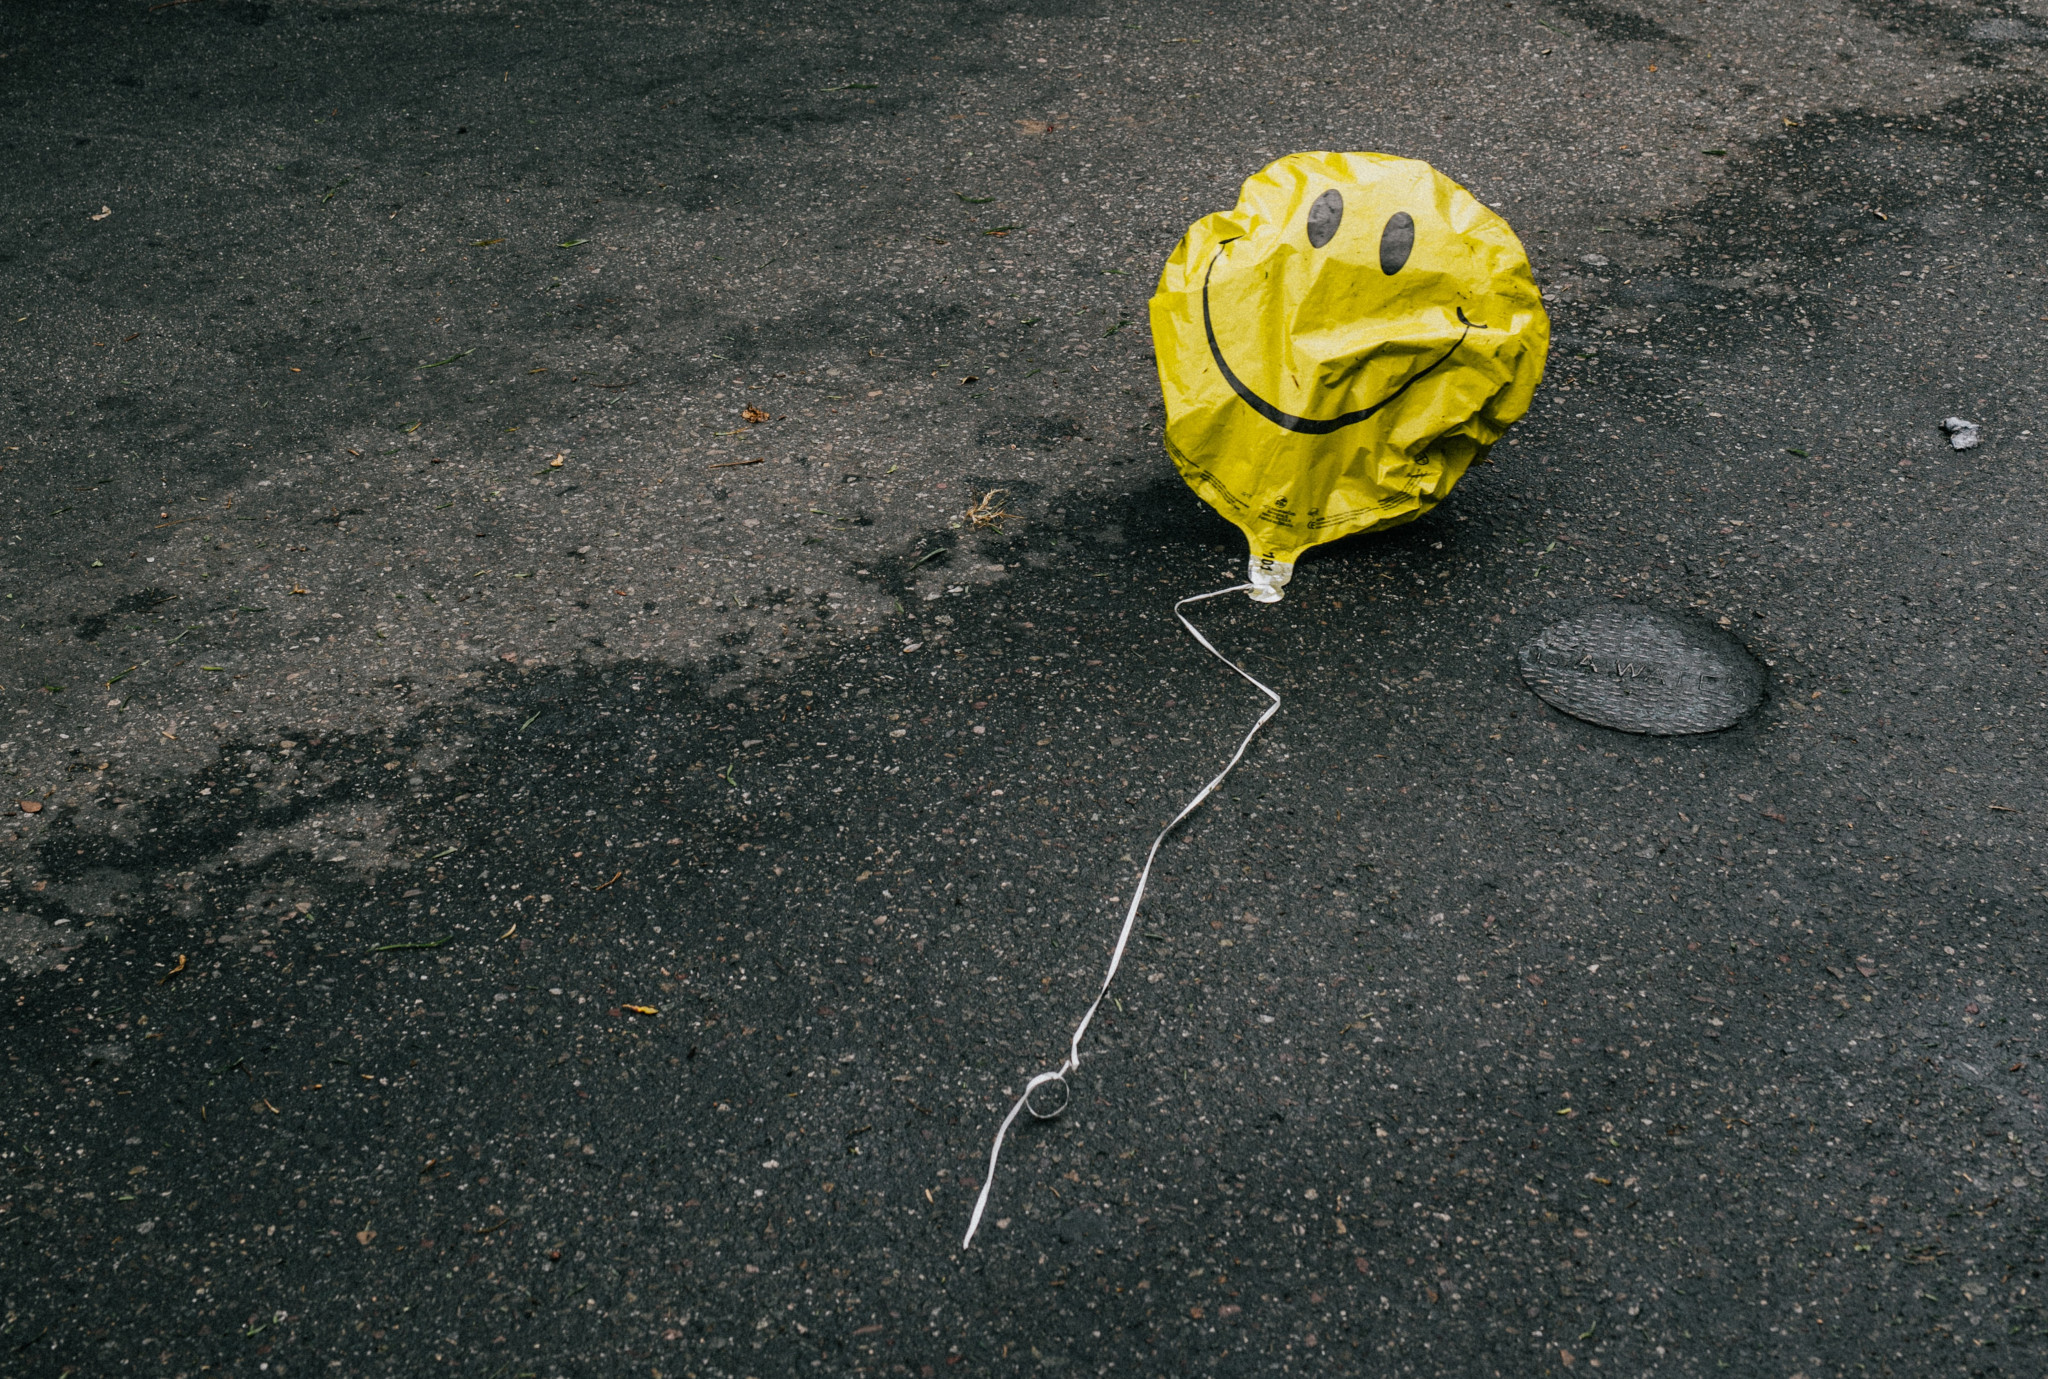 A deflated smiley balloon, lying discarded in the street.